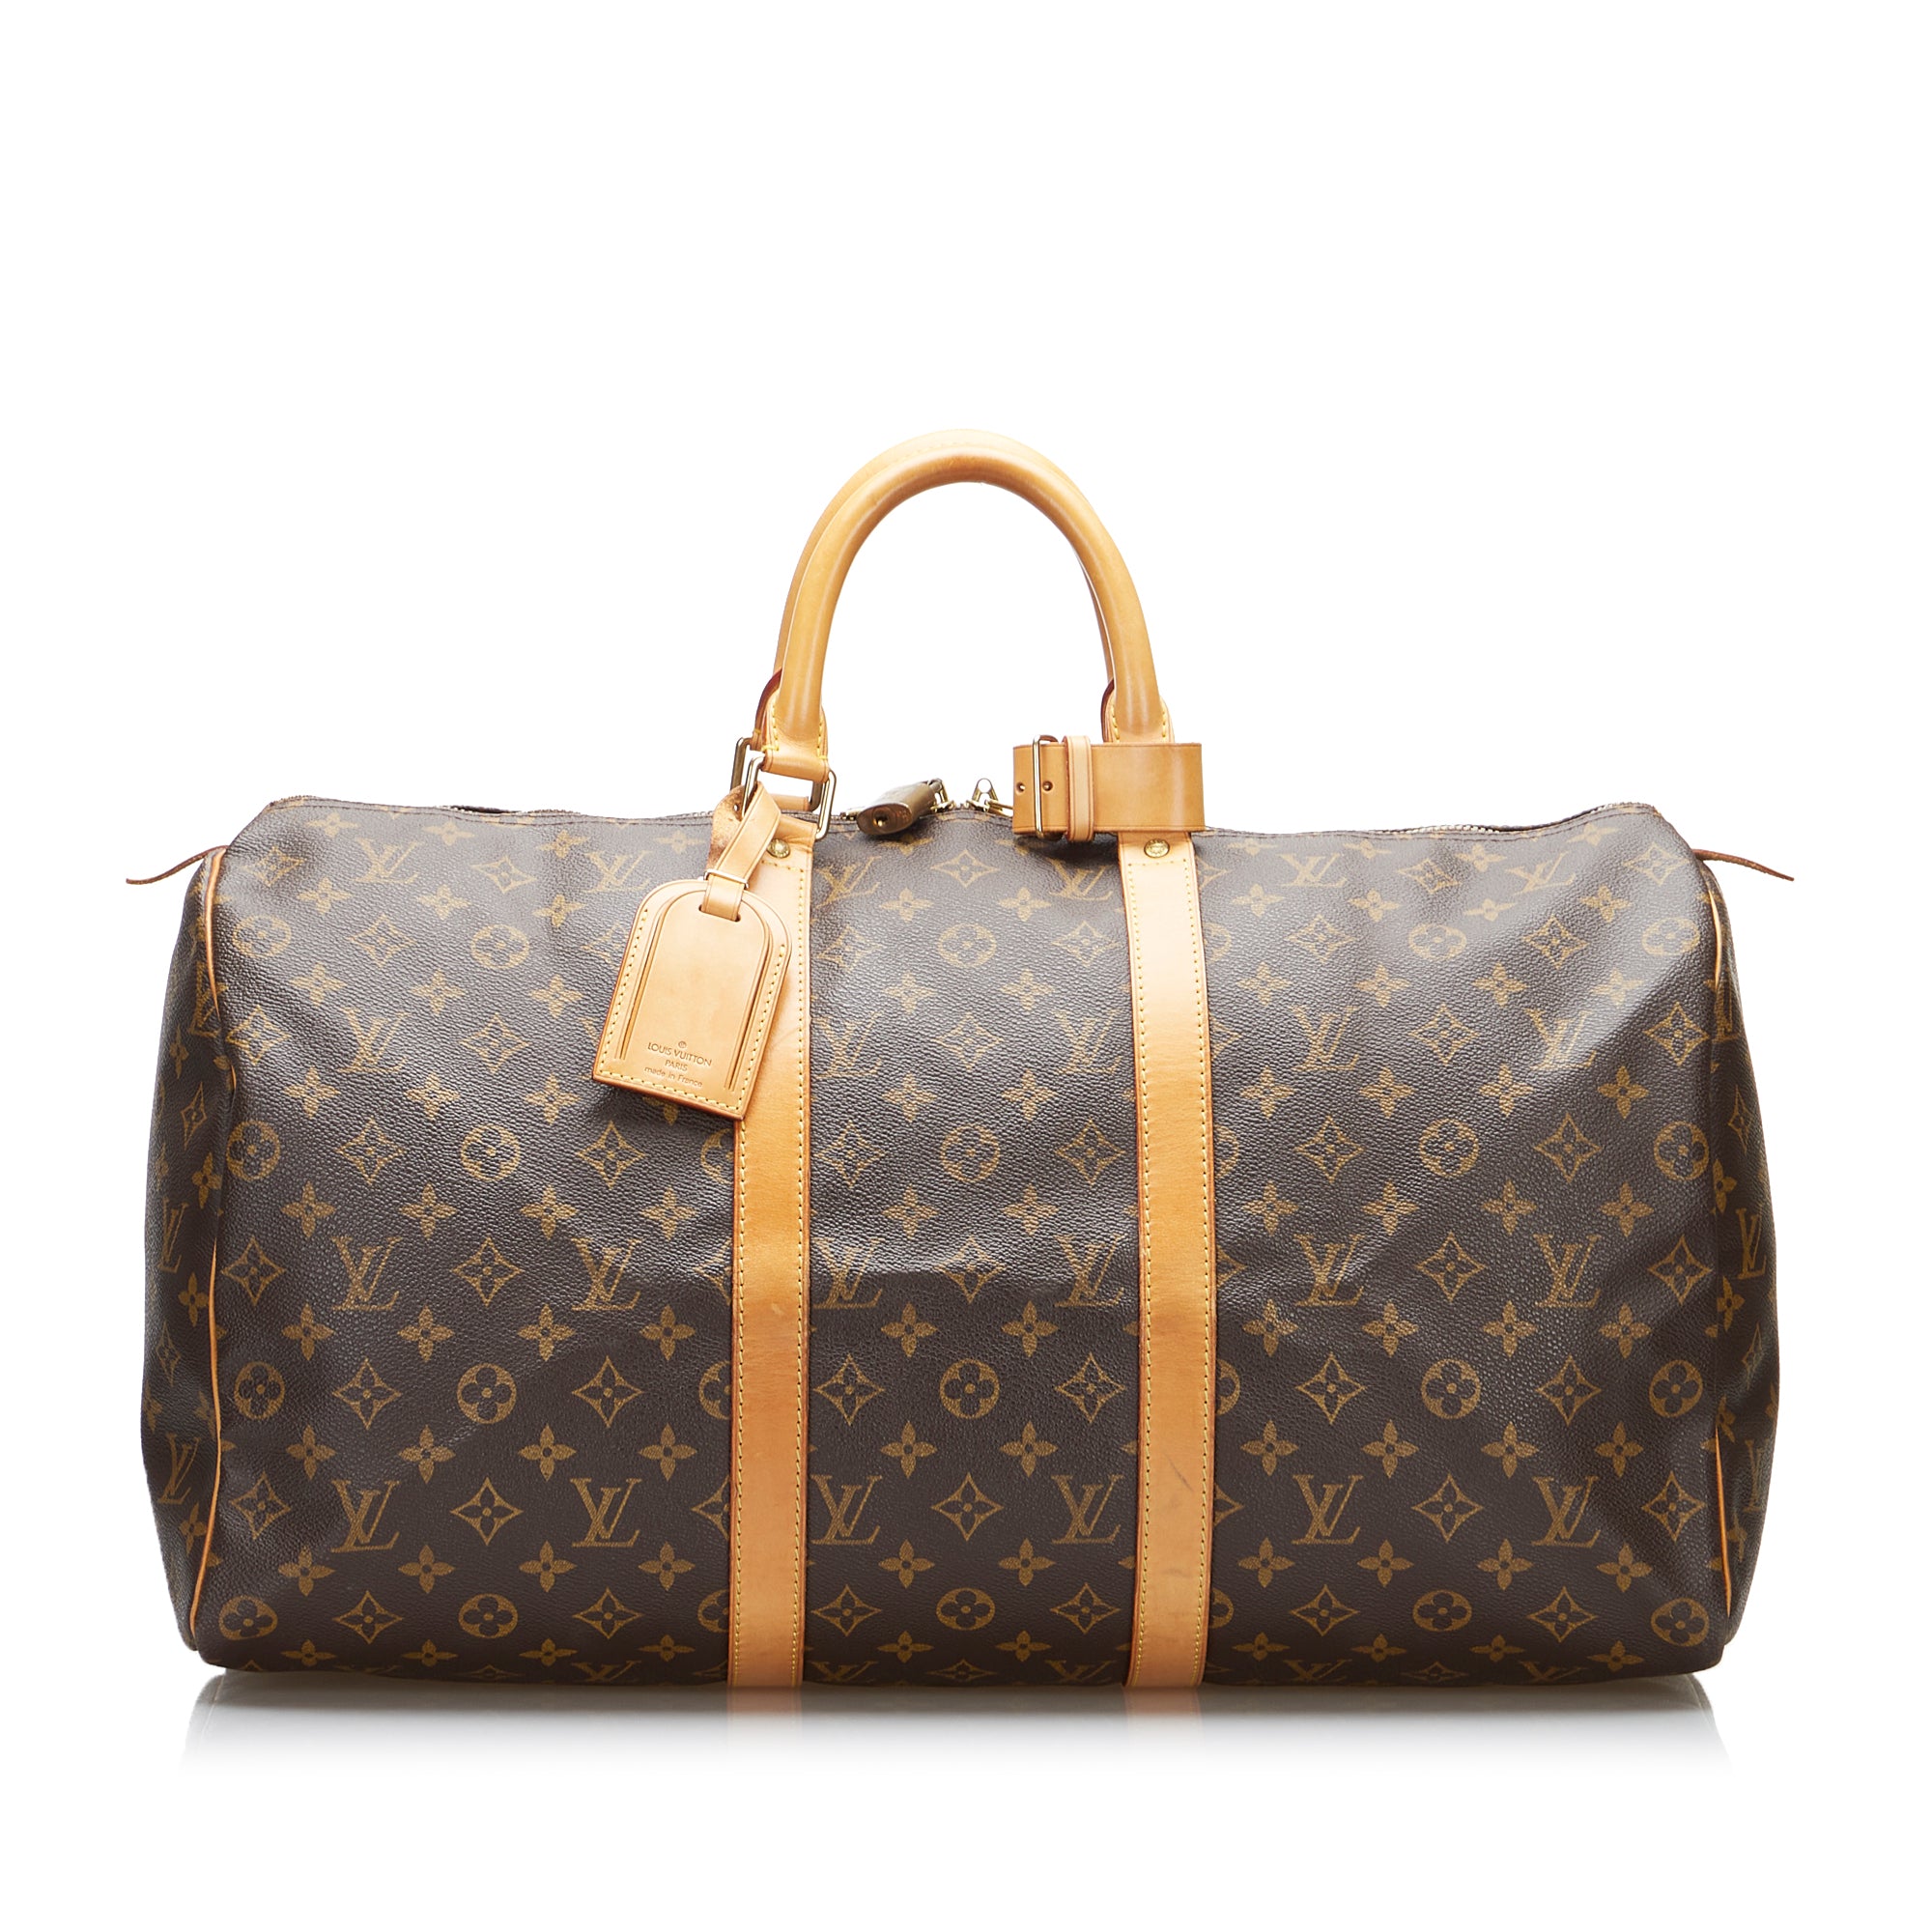 Louis Vuitton by The French Company Monogram Keepall Bag Travel